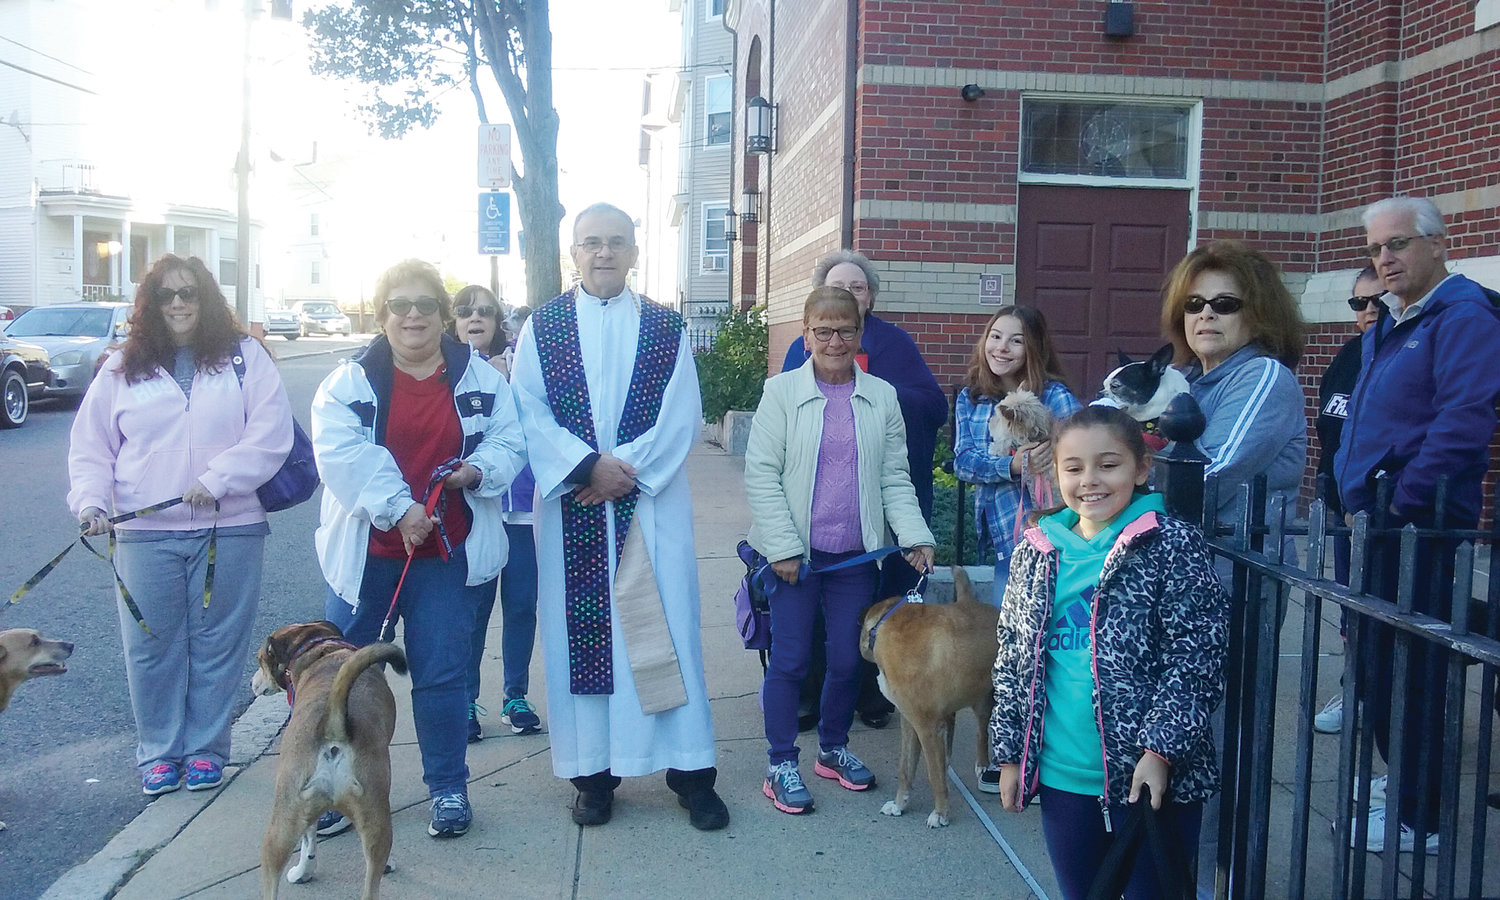 St. Ann Pastor Father Albert Ranallo’s stole was also made by a parishioner. It features multi-colored paw prints, perfect for the occasion. The annual Blessing of the Animals commemorates the feast day of St. Francis of Assisi, patron saint of animals and the environment.